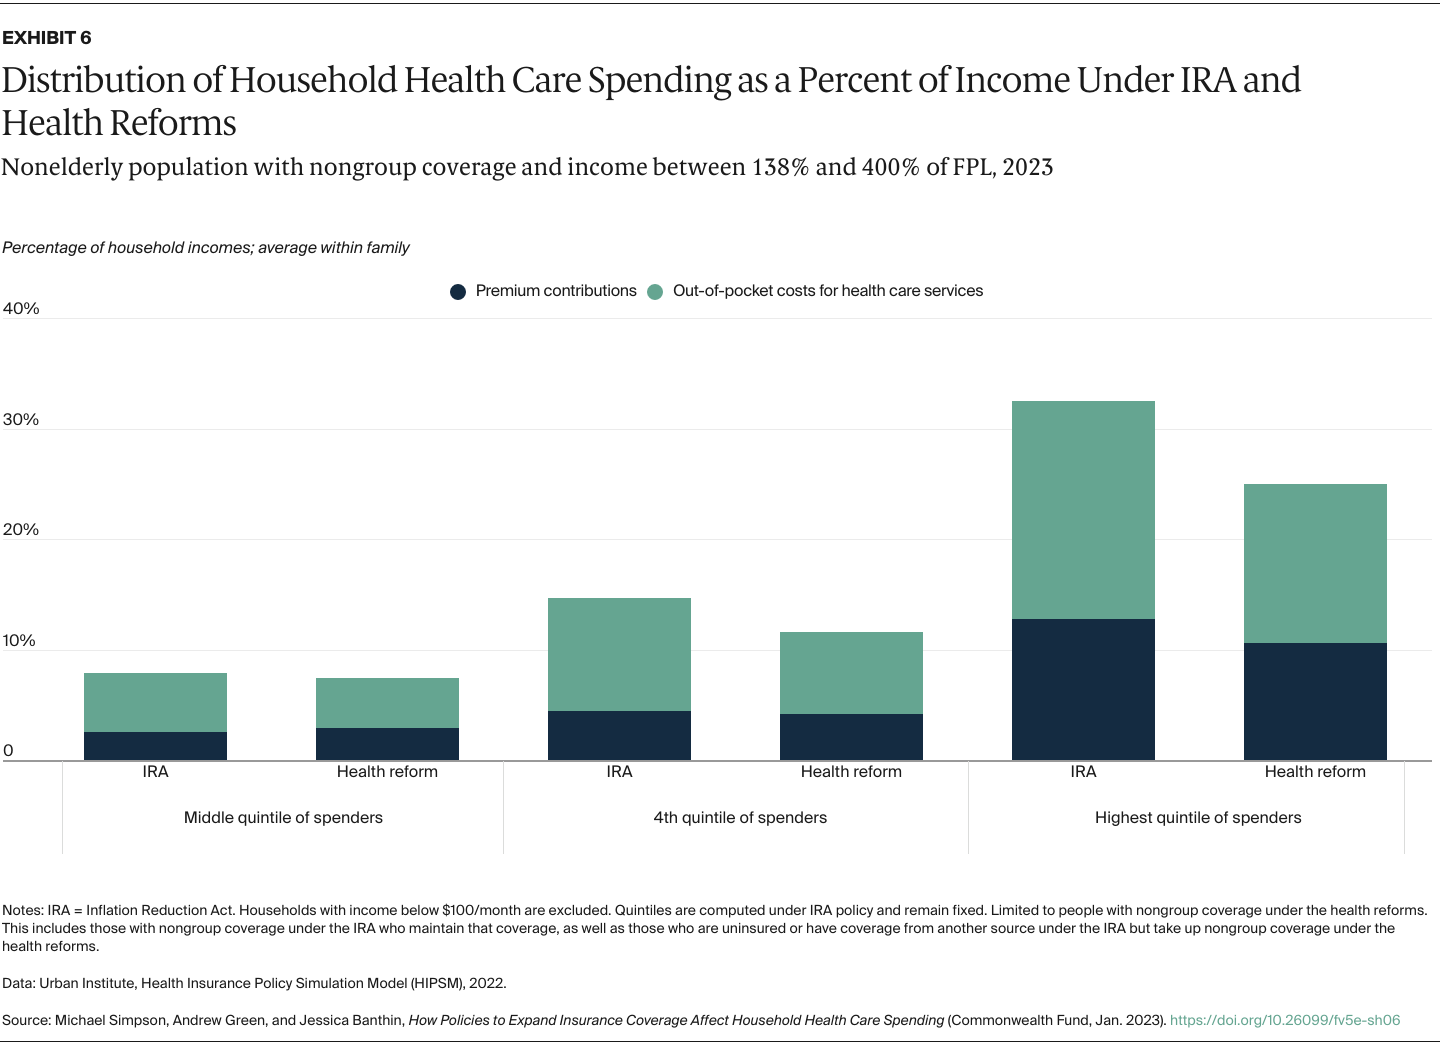 Simpson_policies_expand_coverage_household_spending_Exhibit_06